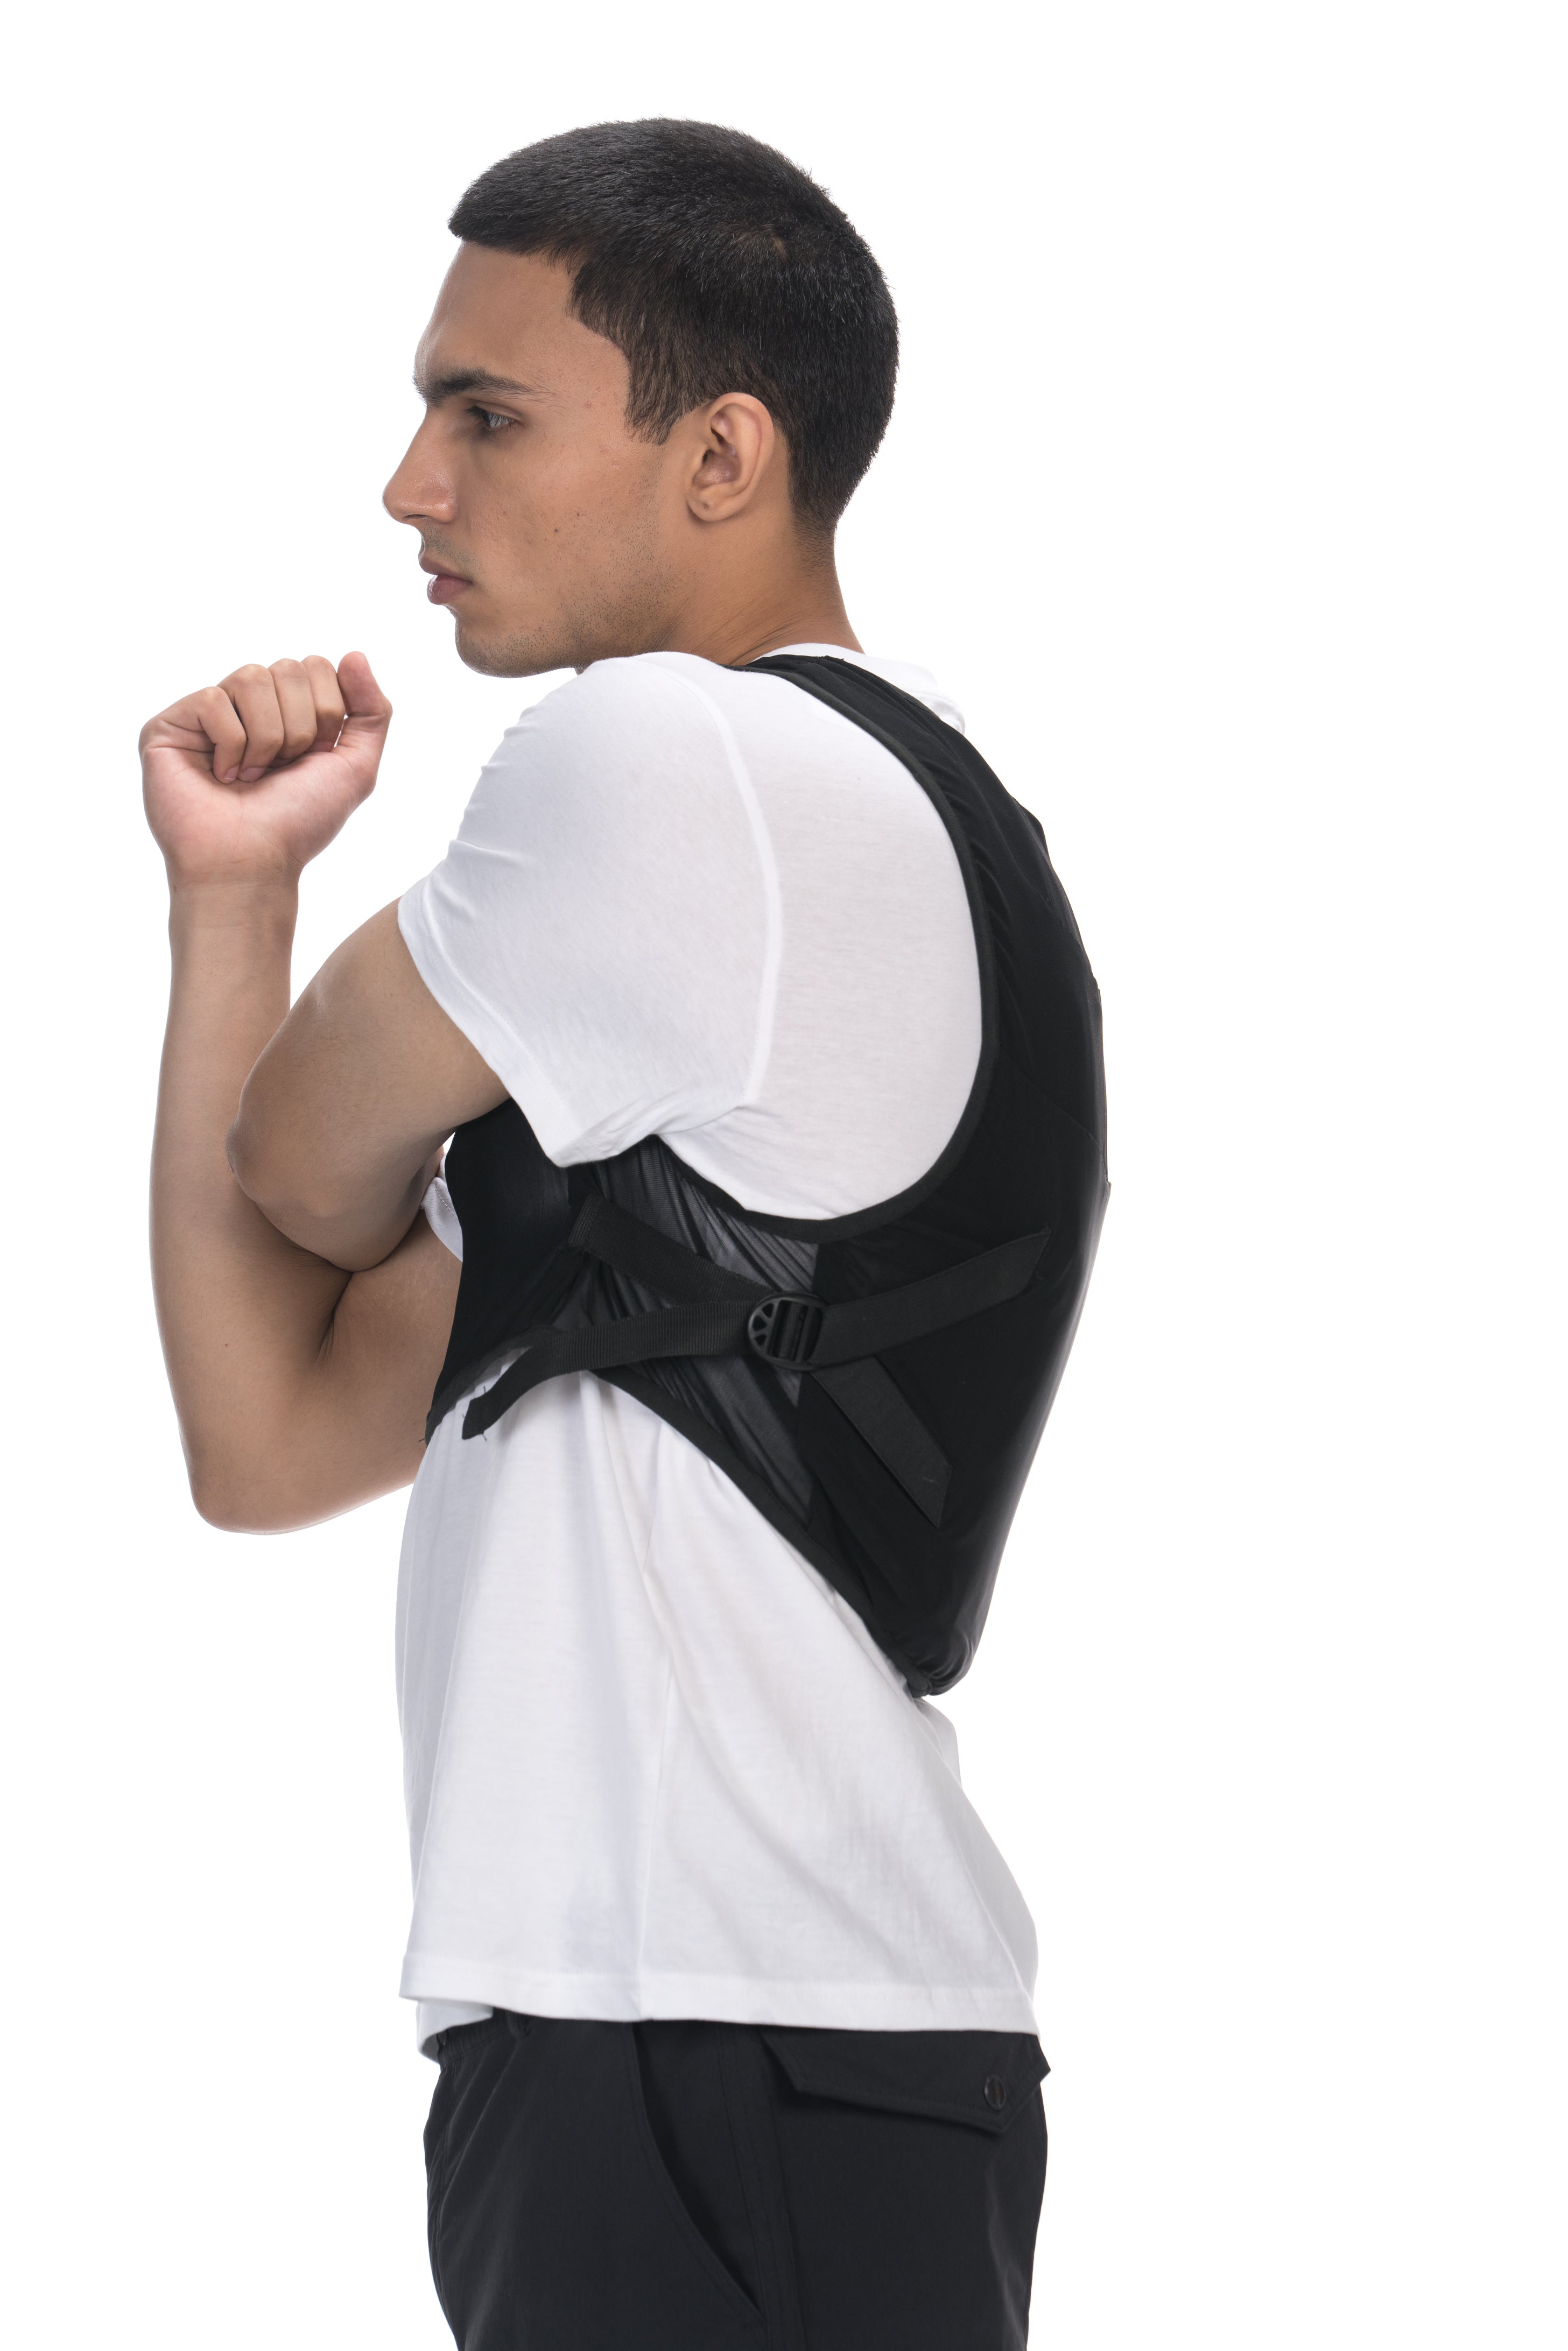 PCM Cooling Vest - Maintains Temperature of 22-24 Degrees for upto 2.5 Hours